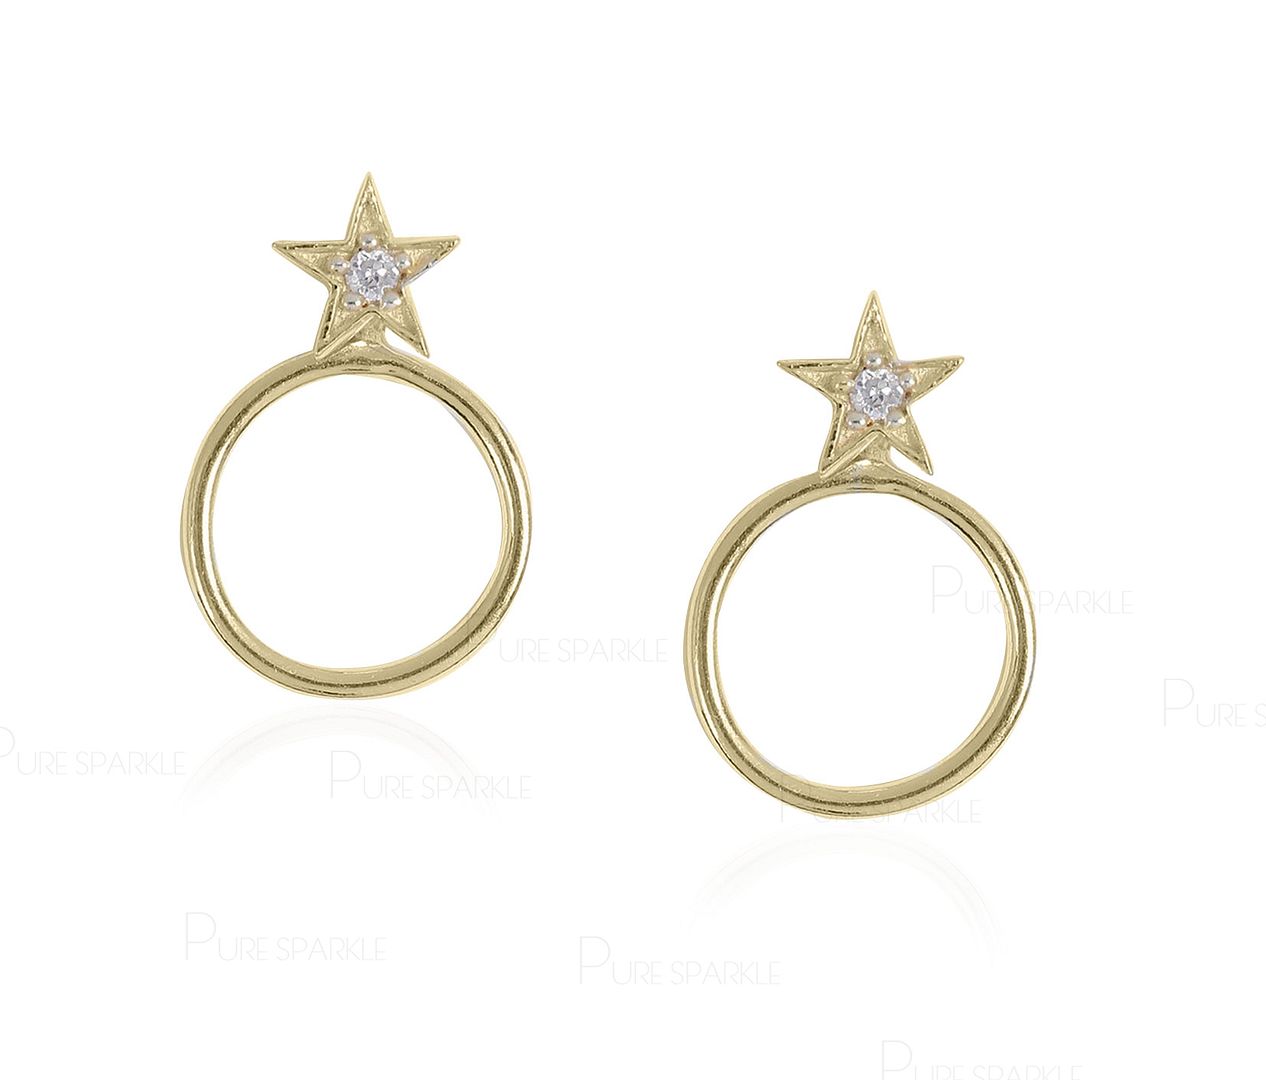 14K Gold 0.07 Ct. Diamond Star And Circle Design Earrings Fine Jewelry